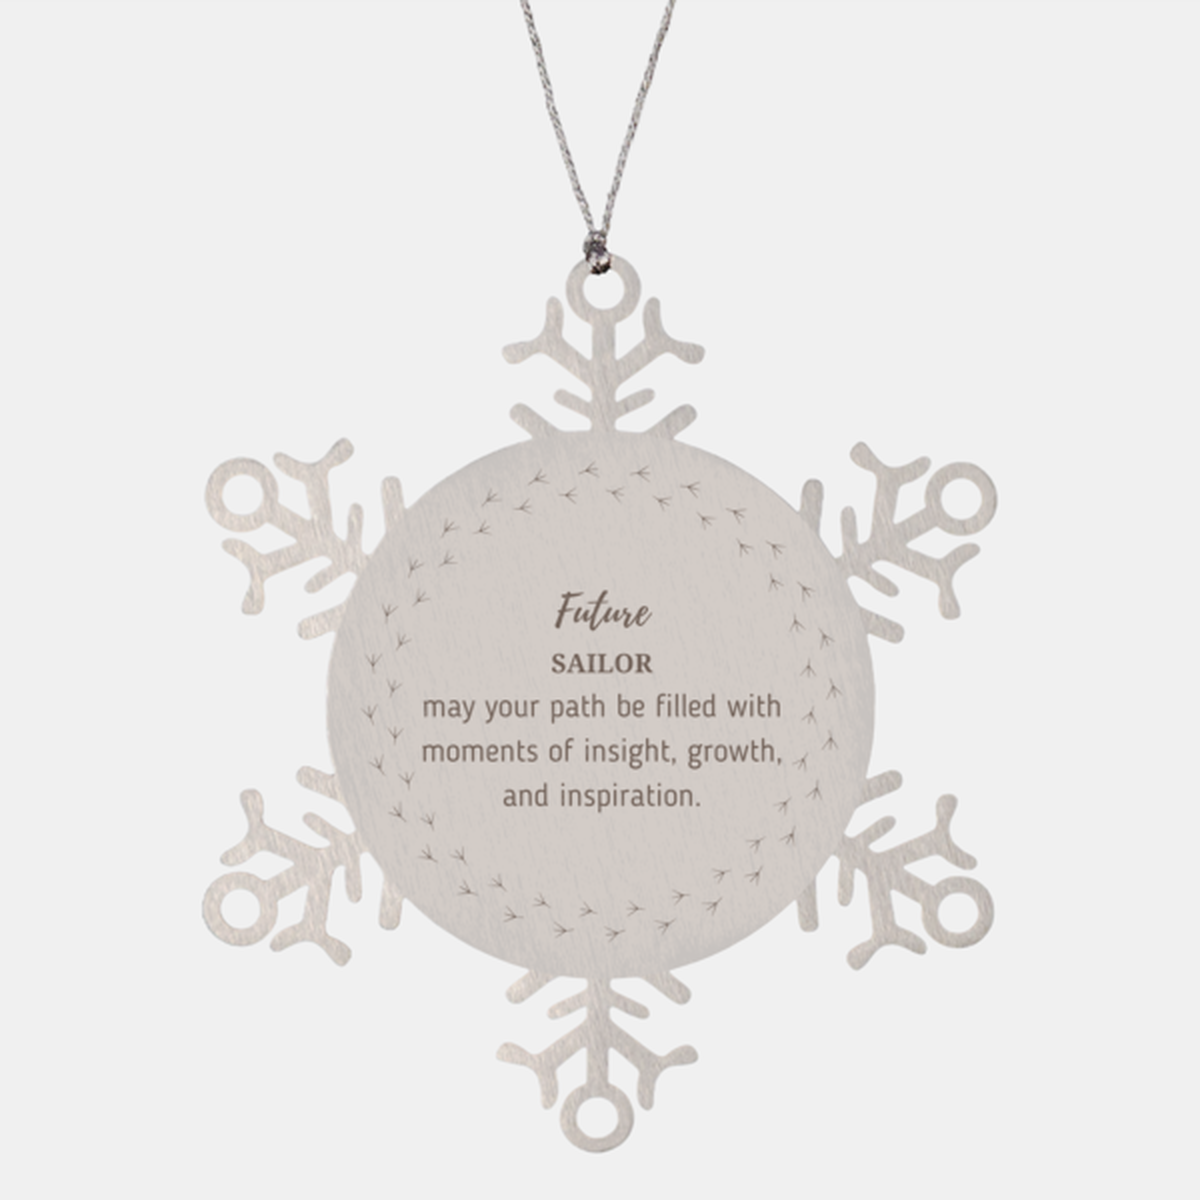 Future Sailor Gifts, May your path be filled with moments of insight, Graduation Gifts for New Sailor, Christmas Unique Snowflake Ornament For Men, Women, Friends